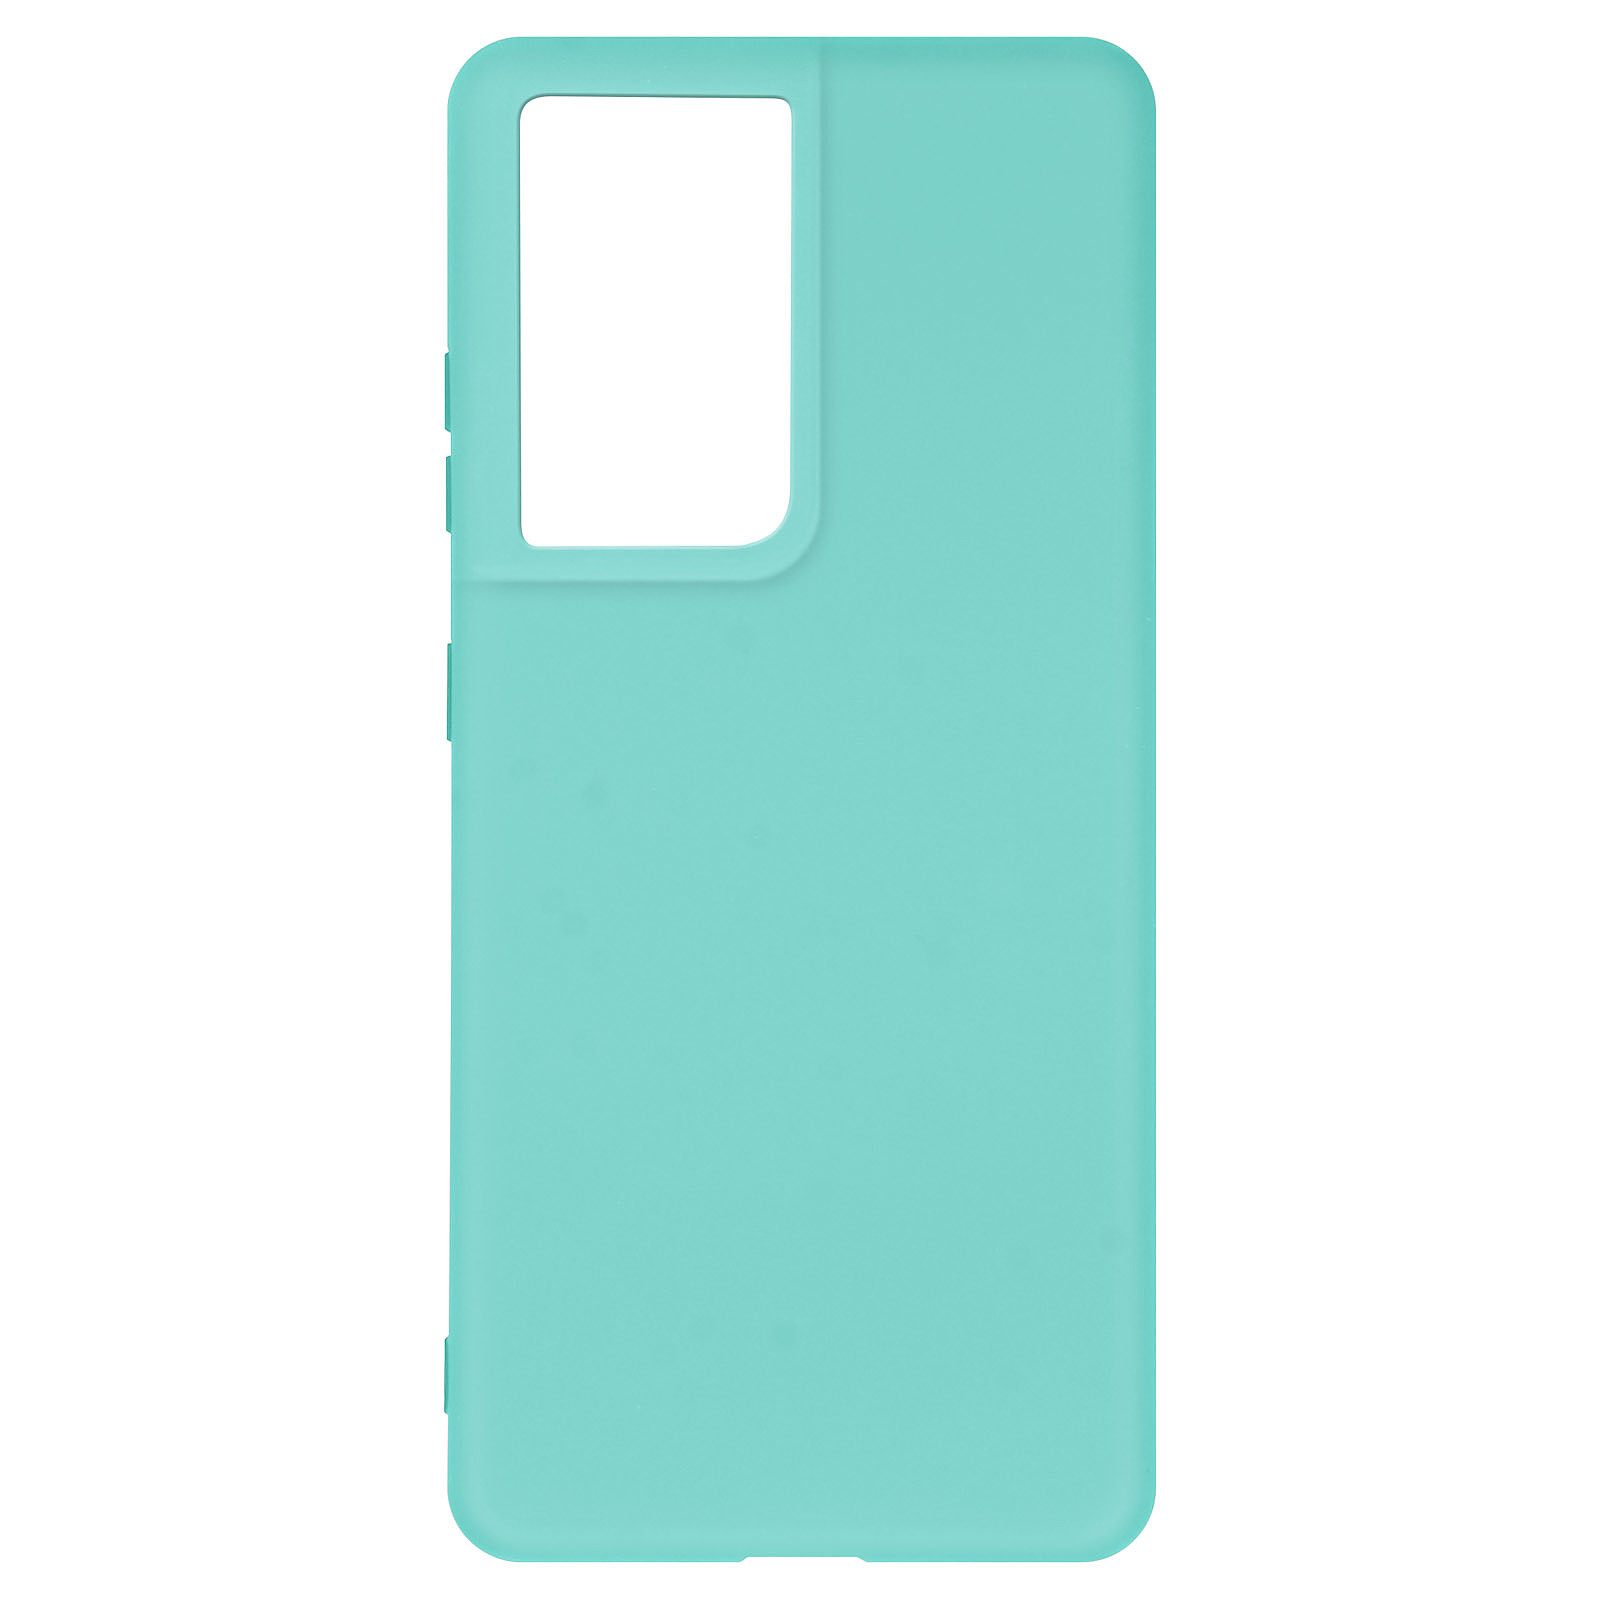 Avizar Coque pour Samsung Galaxy S21 Ultra Silicone Souple Finition Soft Touch Compatible QI Turquoise - Coque telephone Avizar